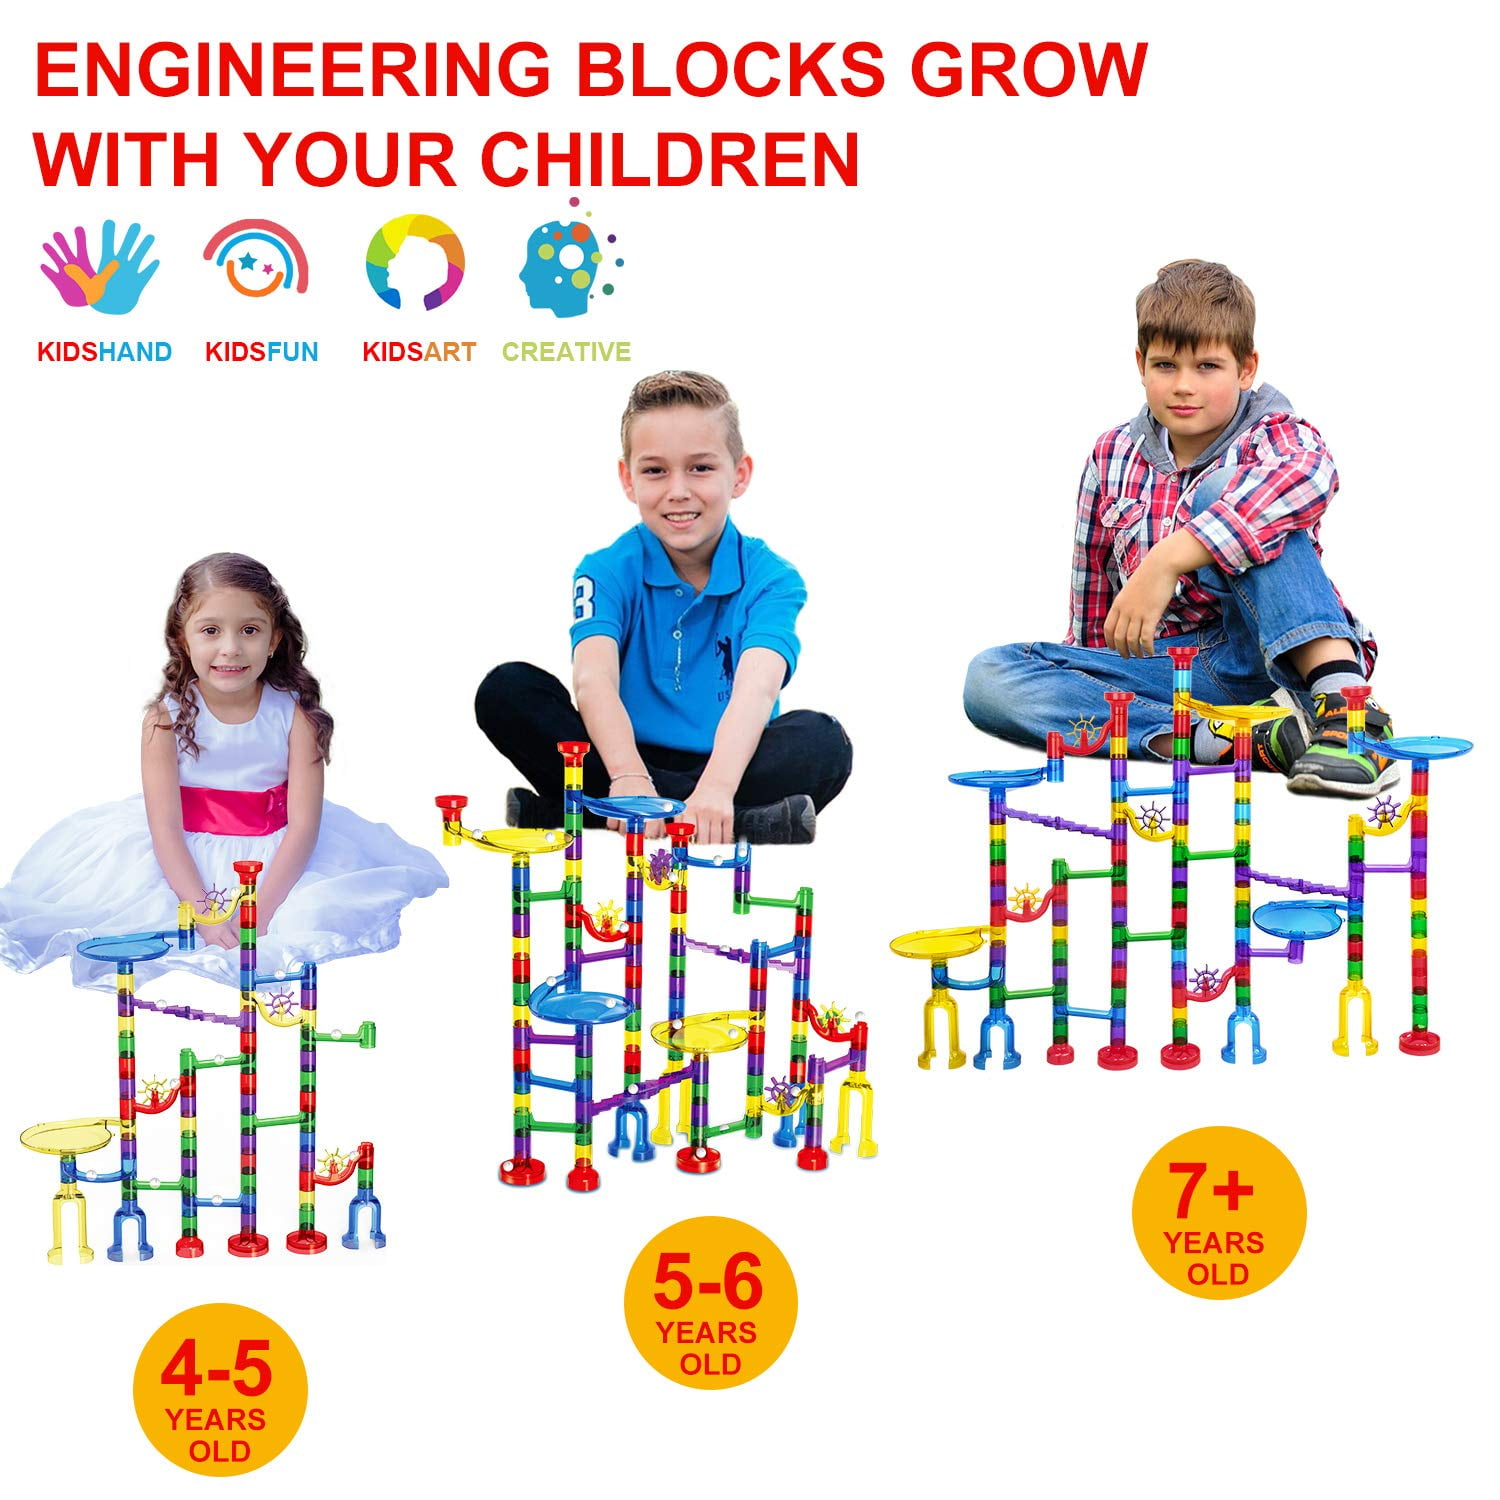 Marble and Many Accessories-Perfect STEM Toy for Toddlers TOY Life 152 PCS Marble Run Set Building Blocks-Marble Race Tracks for Kids Includes Classic Big Blocks Kids Age 3,4,5,6,7,8,9+ 